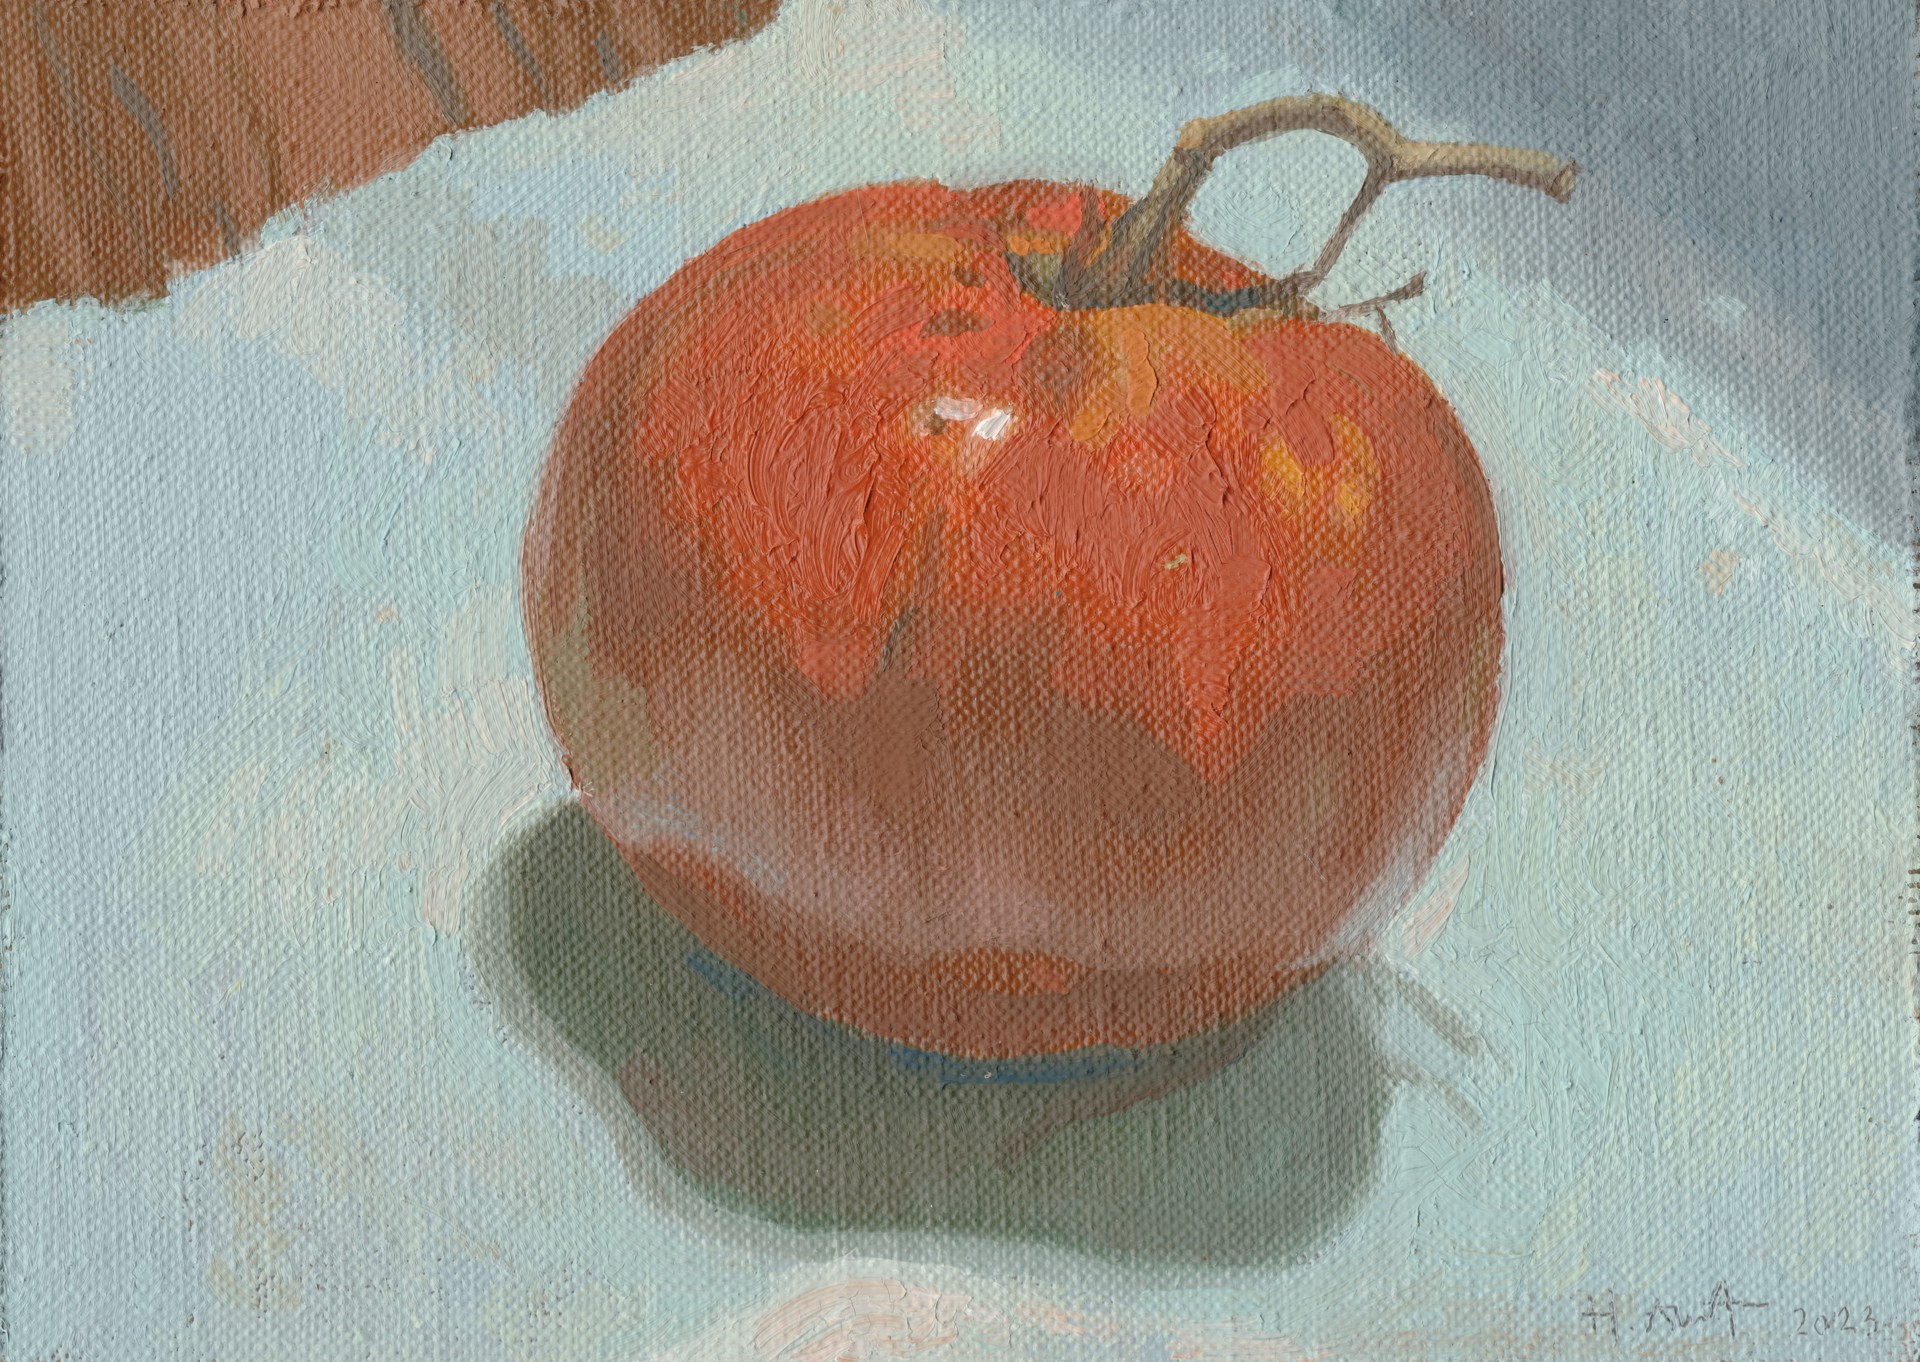 Tomato Study by Hector Acuna